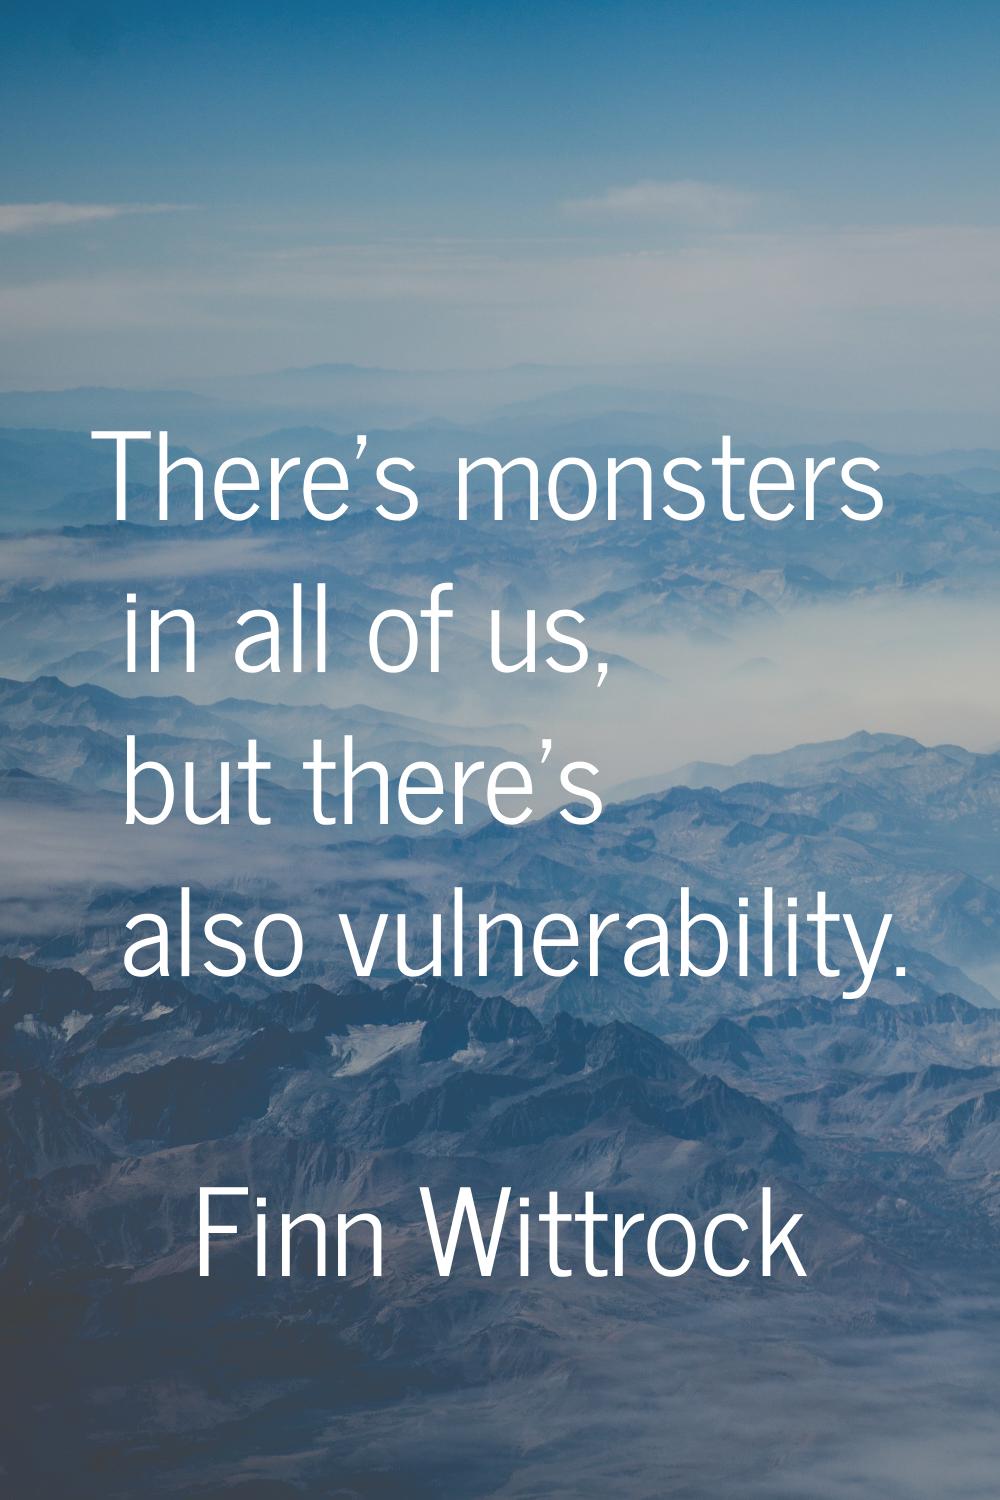 There's monsters in all of us, but there's also vulnerability.